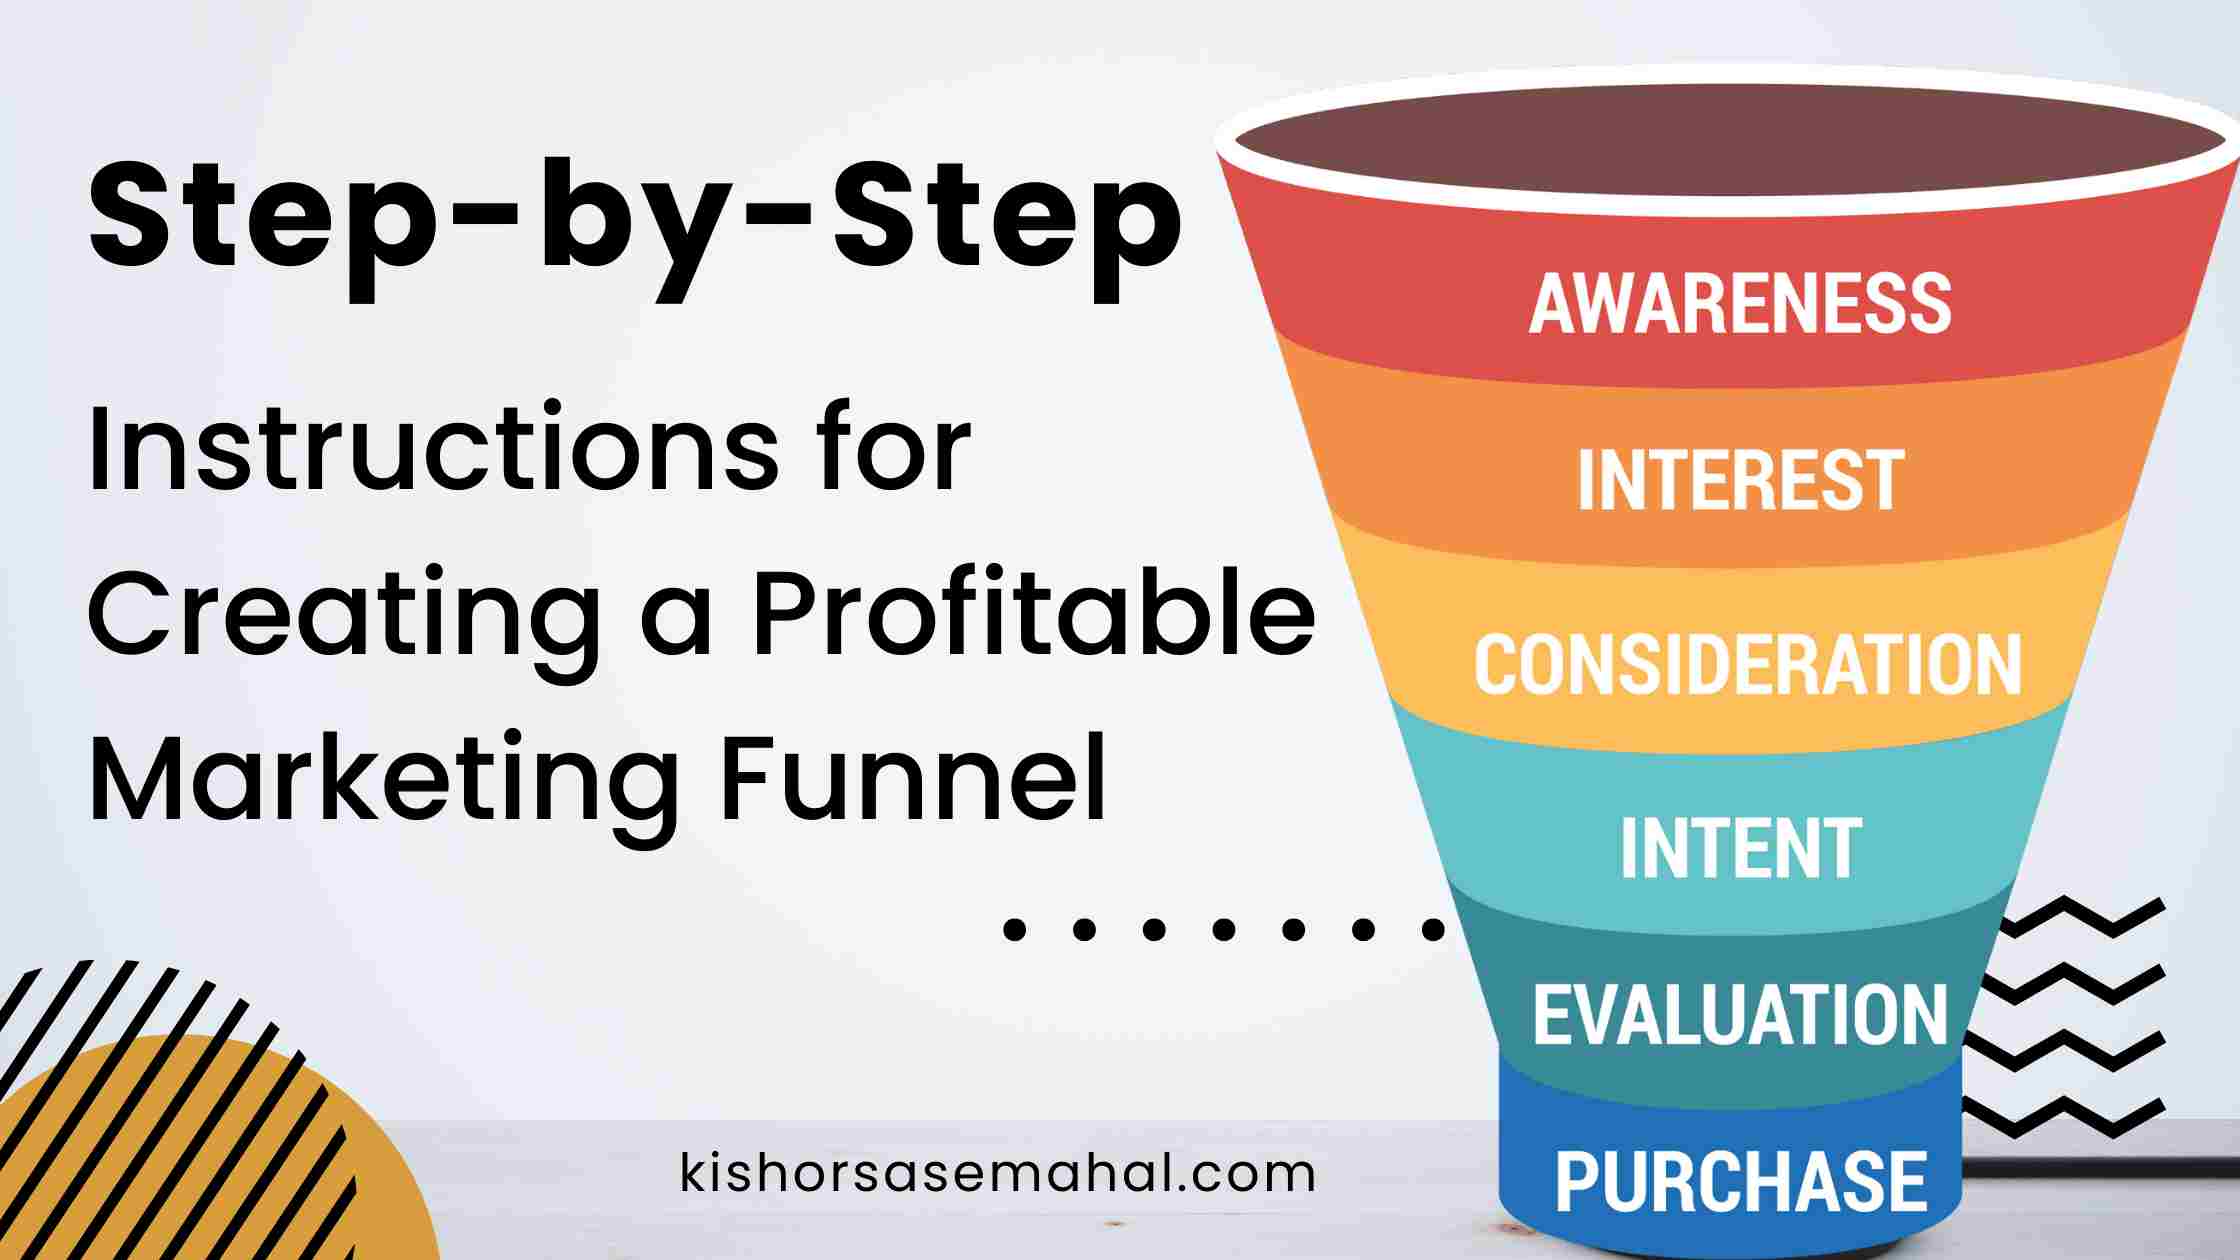 Step-by-Step Instructions for Creating a Profitable Marketing Funnel